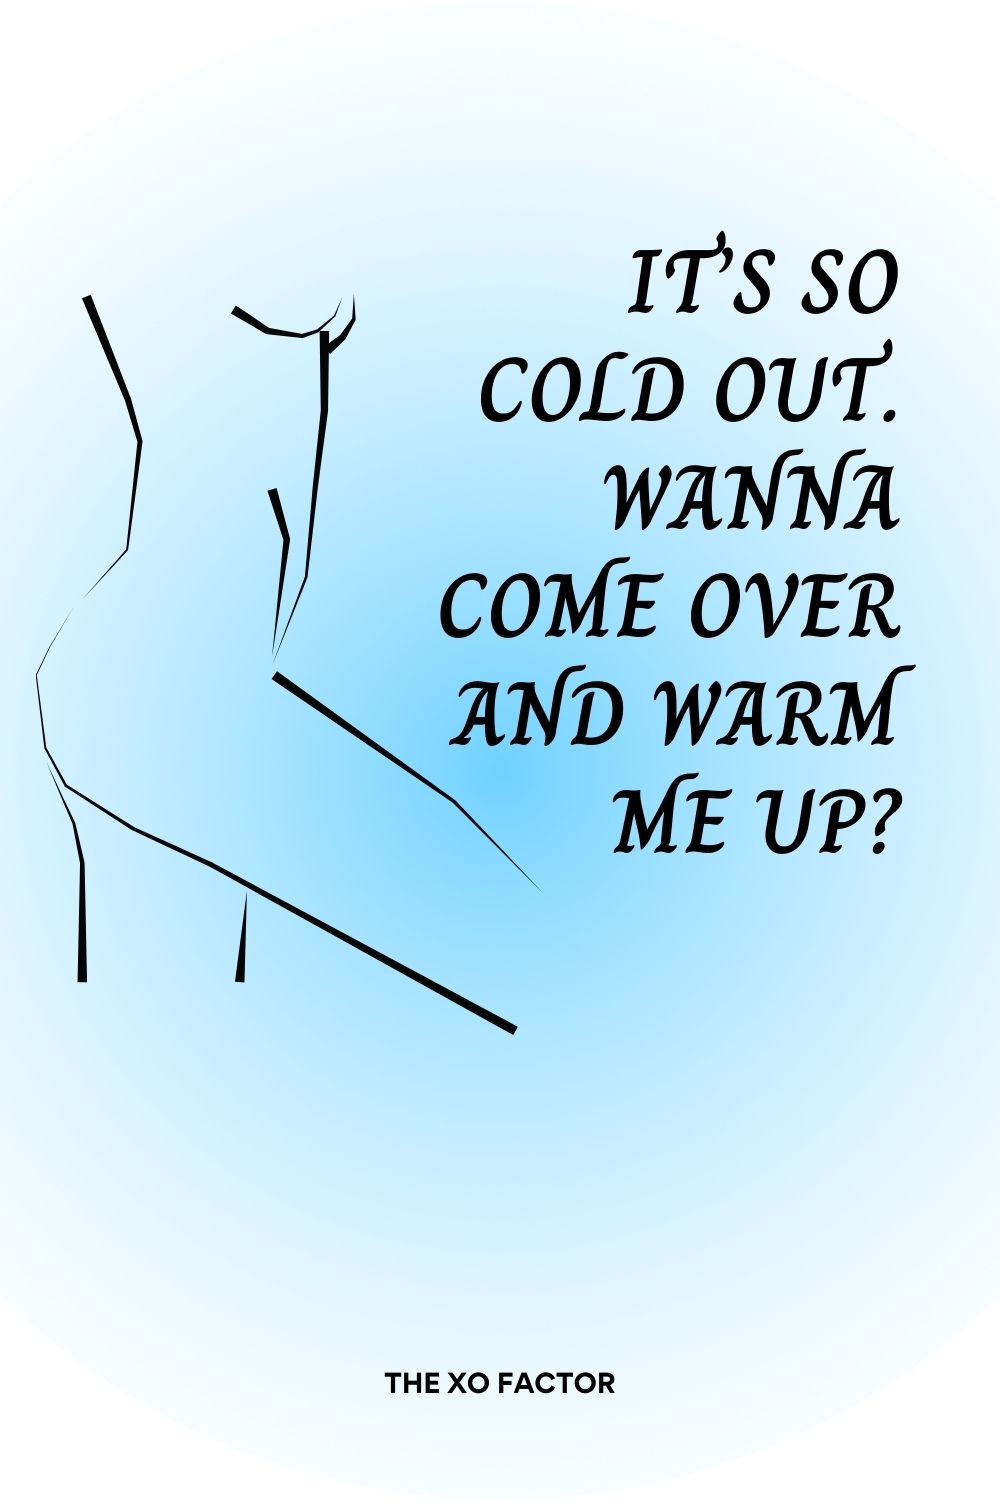 It’s so cold out. Wanna come over and warm me up?